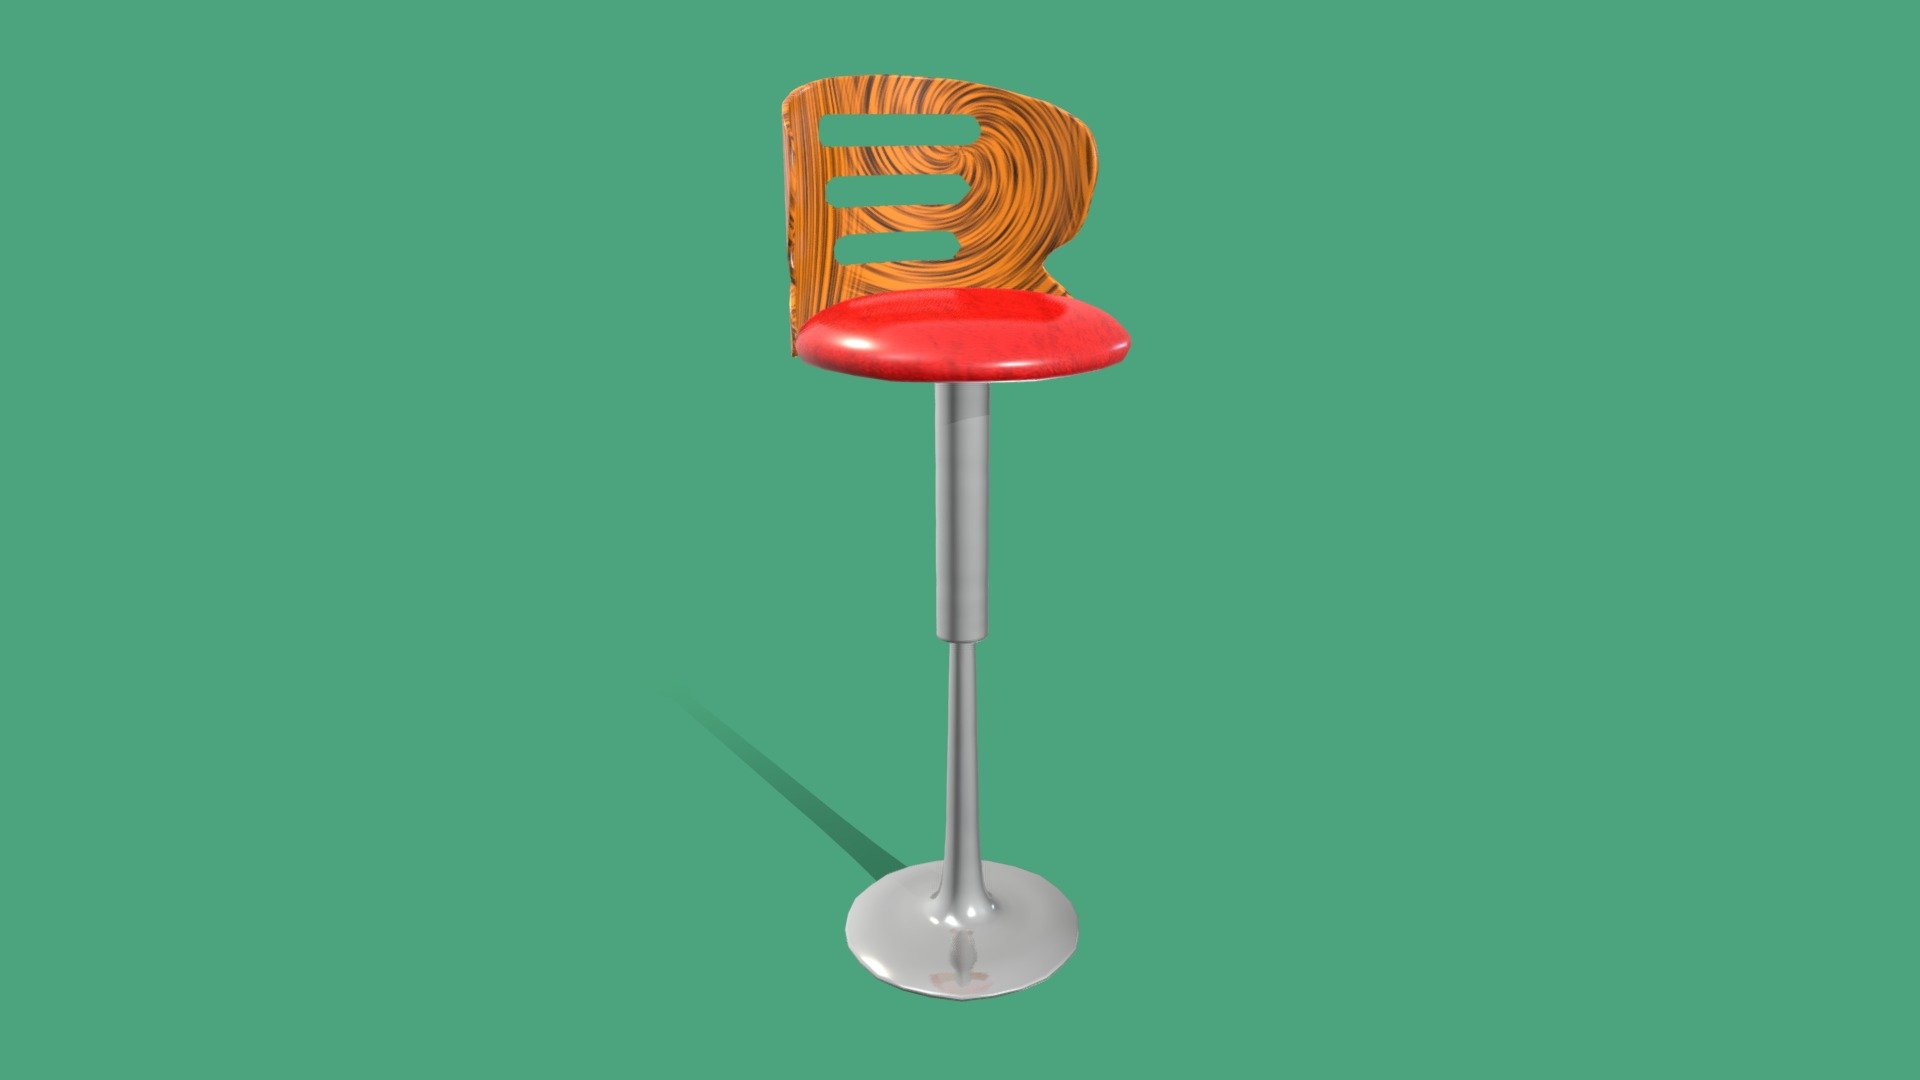 Dusted off this Stool i made years ago for some substance practice, makes for a practical Resturaunt asset however 3d model